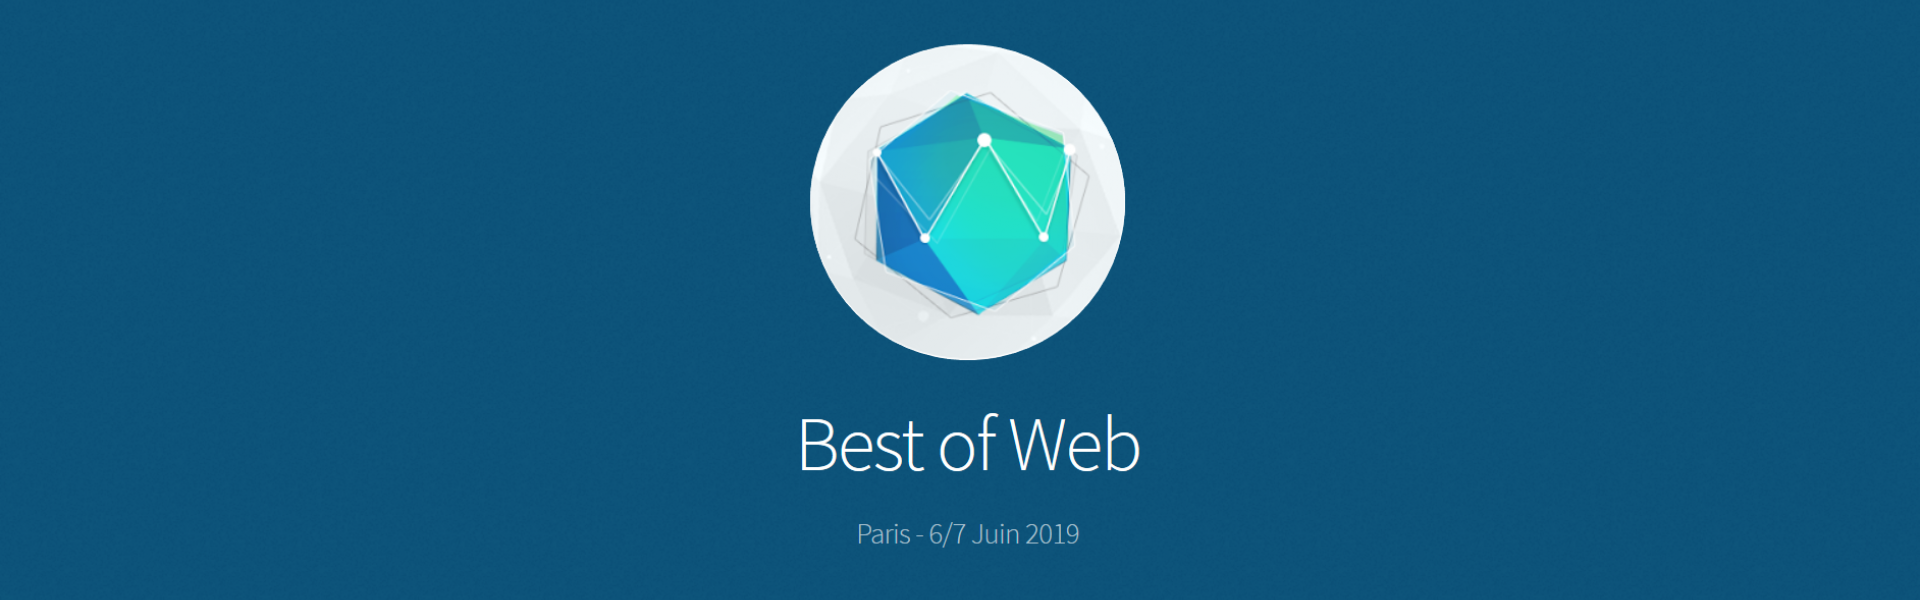 Best of Web by VISEO